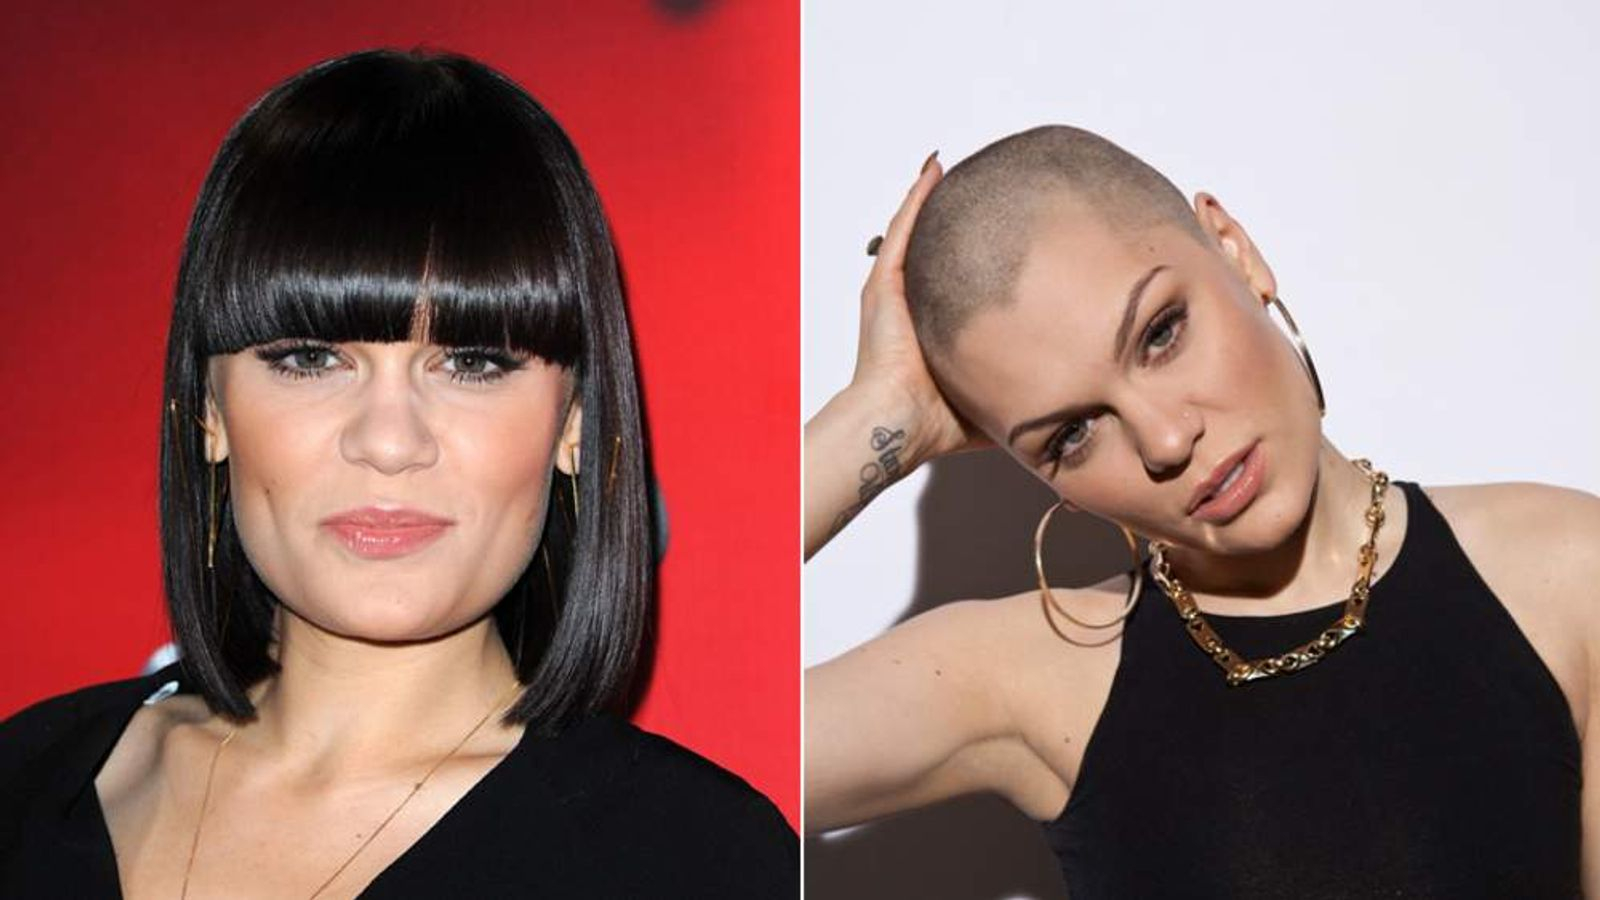 Jessie J with hair and bald